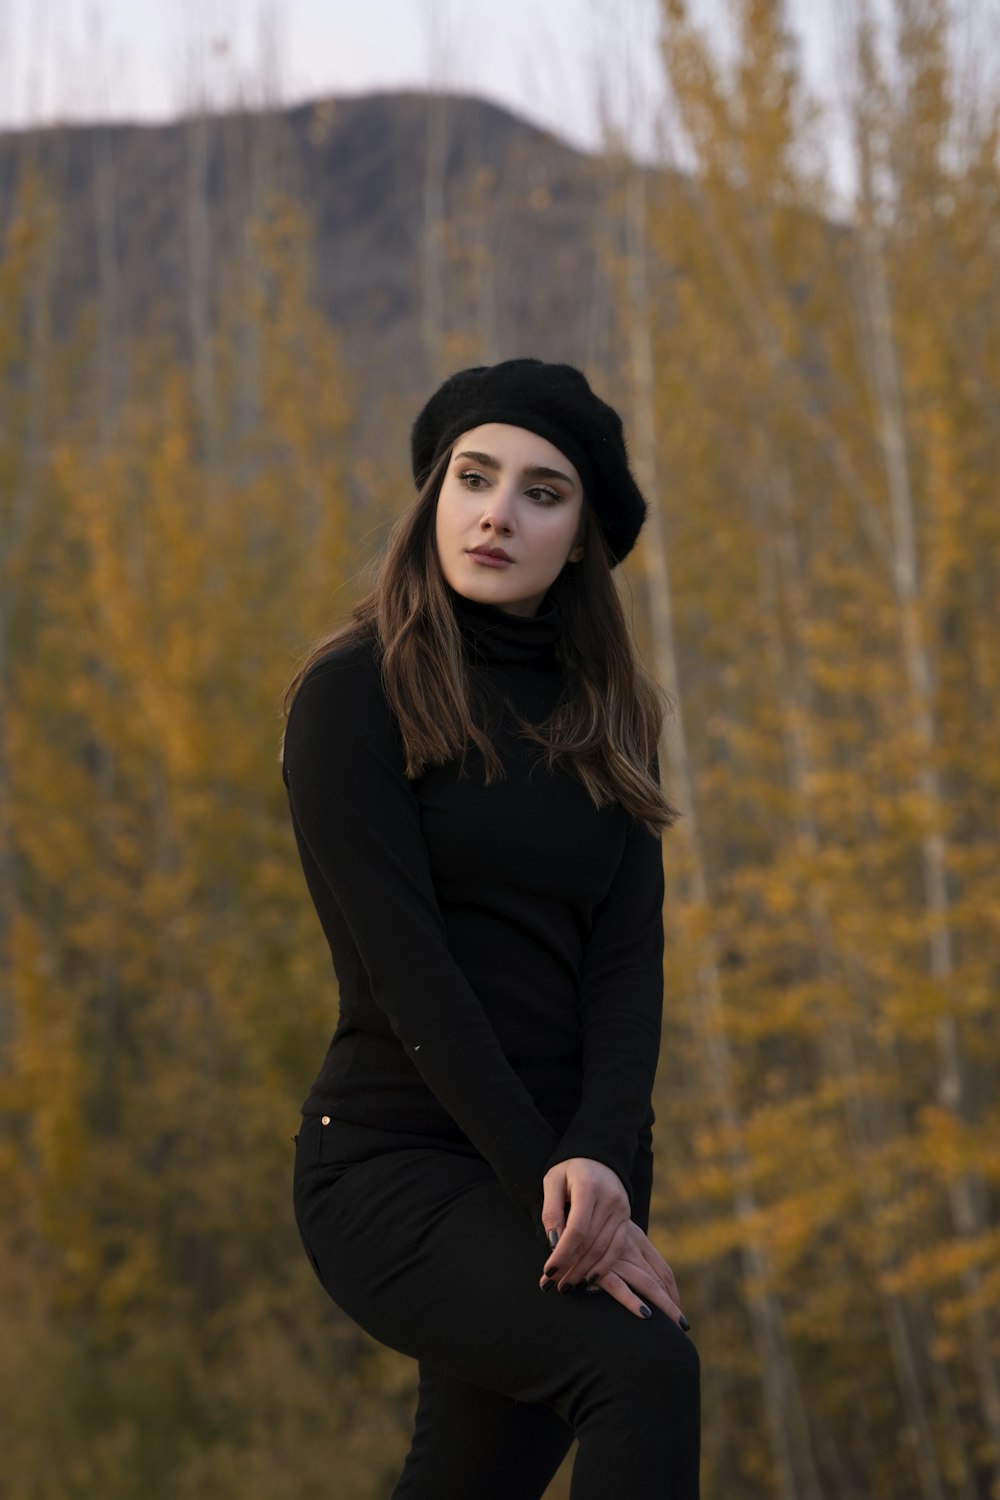 a woman in a black outfit and a black hat